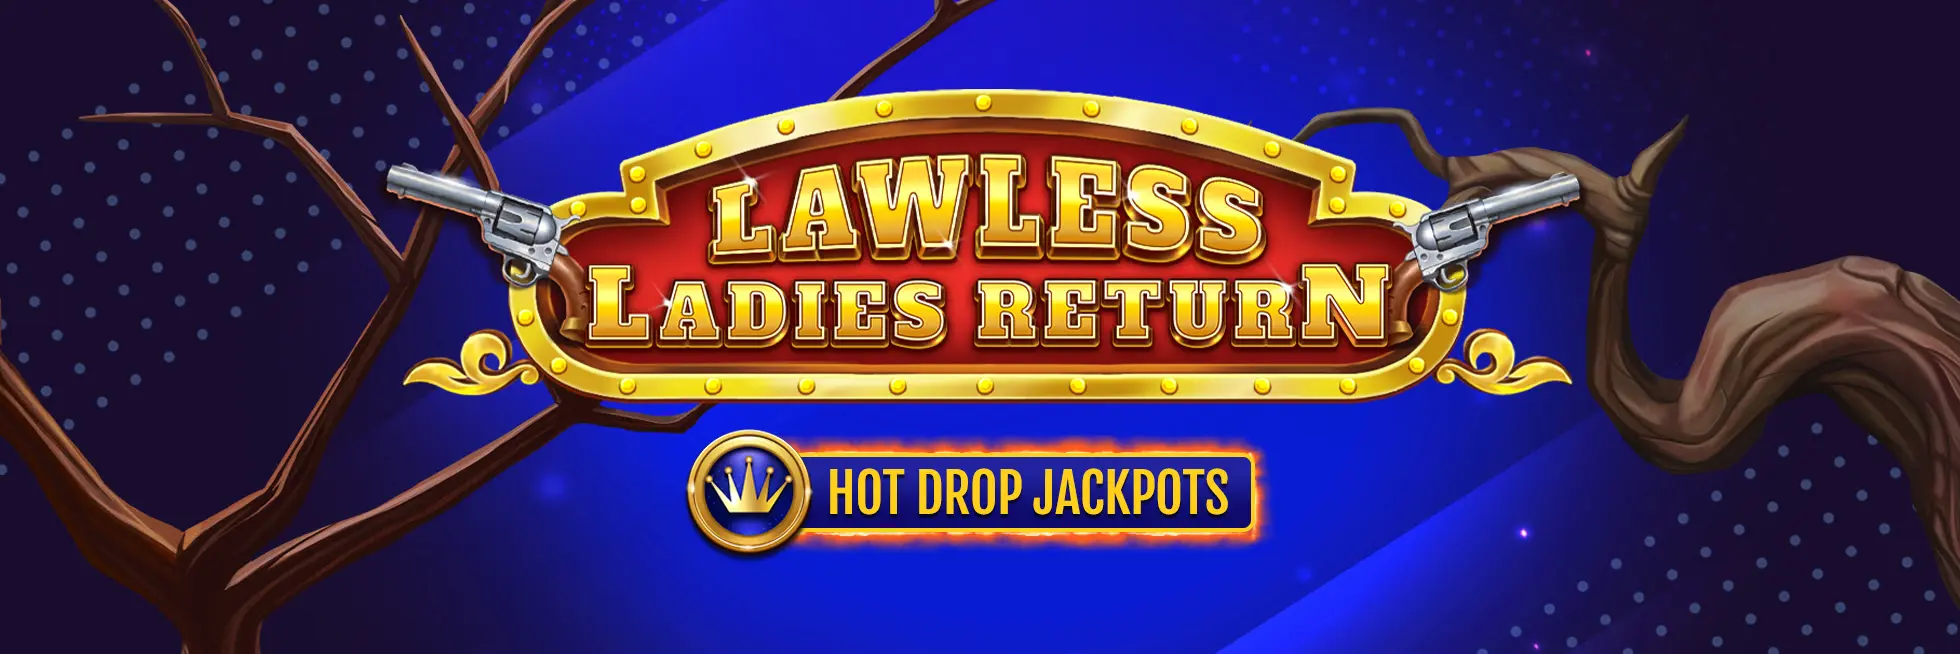 Embark on a Wild West escapade with Lawless Ladies Return at Joe Fortune, featuring exhilarating Free Spins, Crack Stack, and the chance to win with Hot Drop Jackpots.